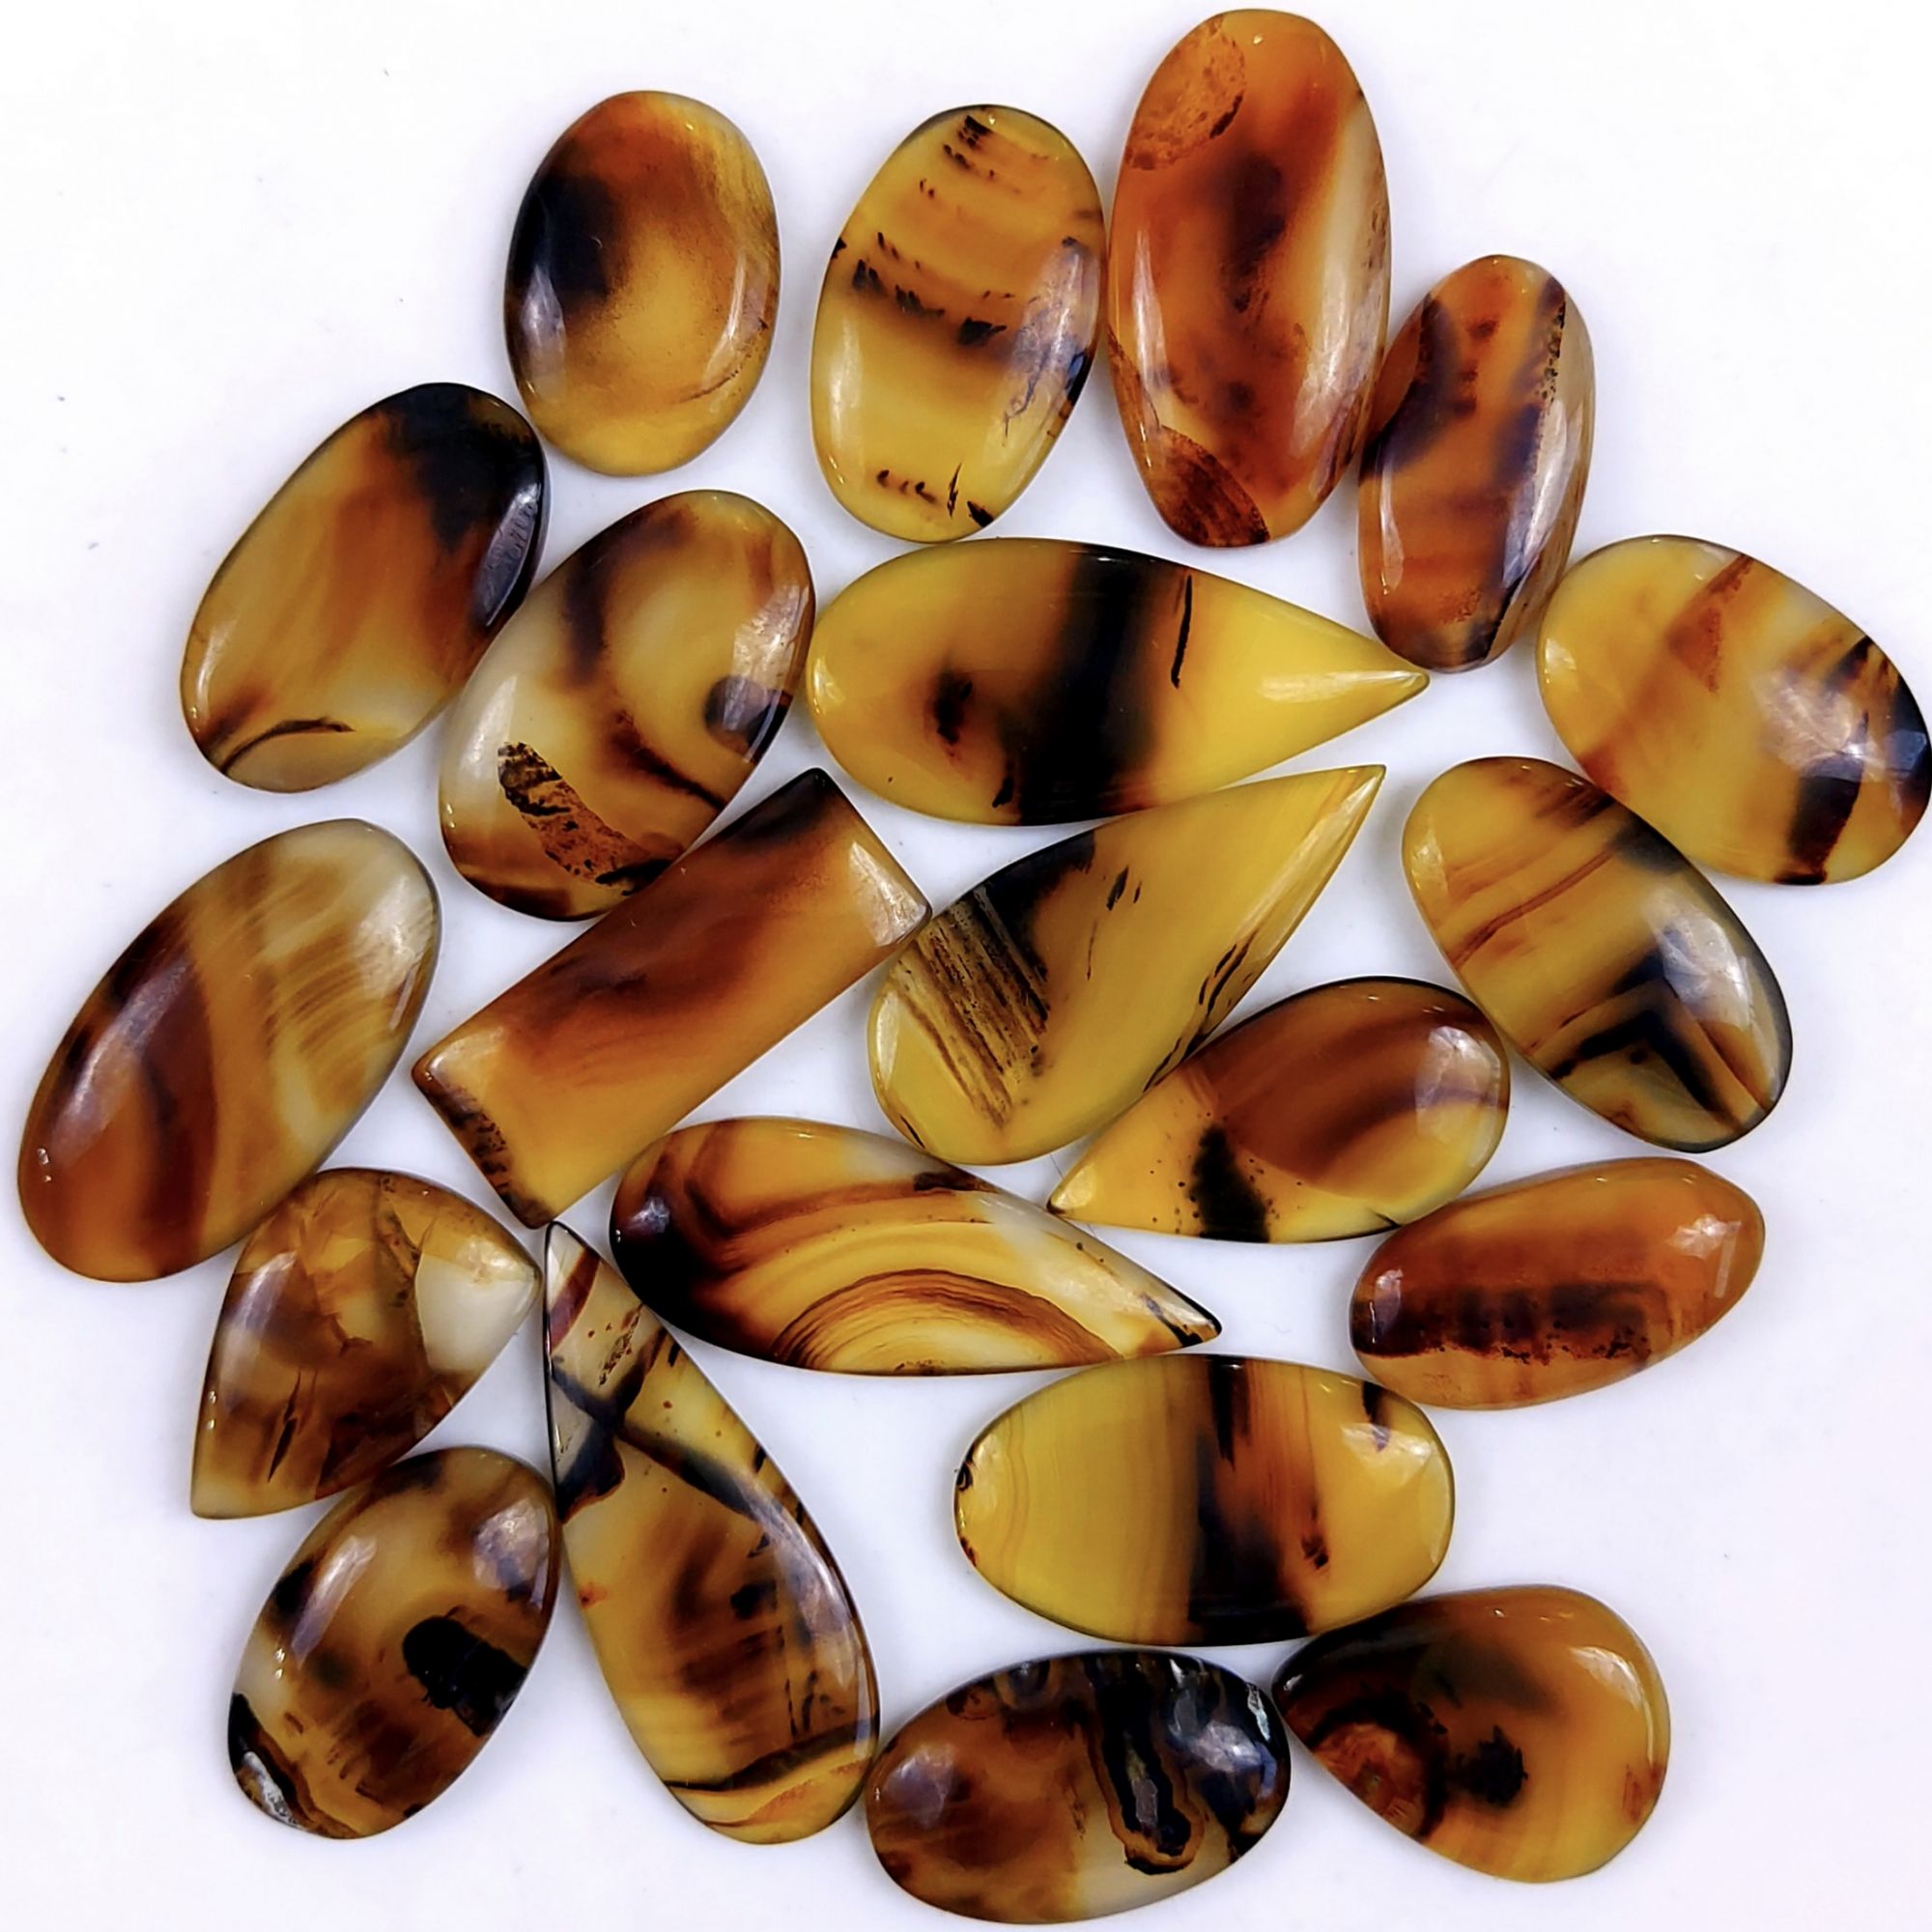 25Pcs 326Cts Natural Montana Agate Cabochon Lot Brown Flat Back Gemstone Crystal Wholesale Loose gemstone For Jewelry Making 30x13 14x10mm